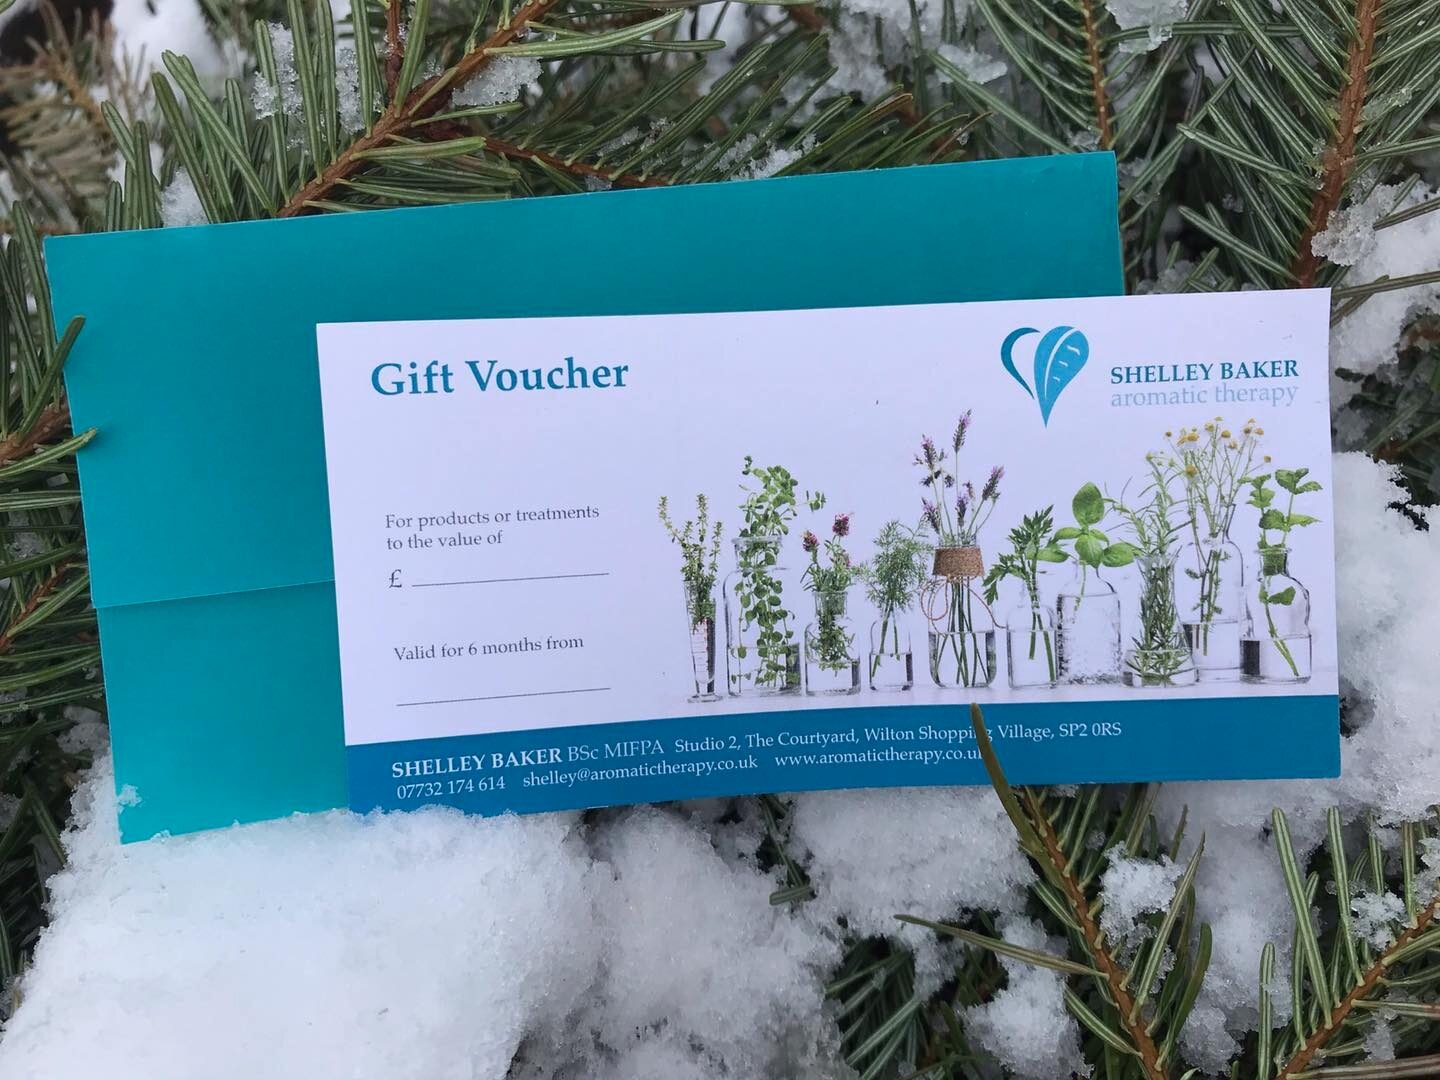 Still searching for a gift for a special someone? 

Shelley Baker Aromatic Therapy have Gift vouchers and Muscle Gel &amp; Bath Soak available for collection.